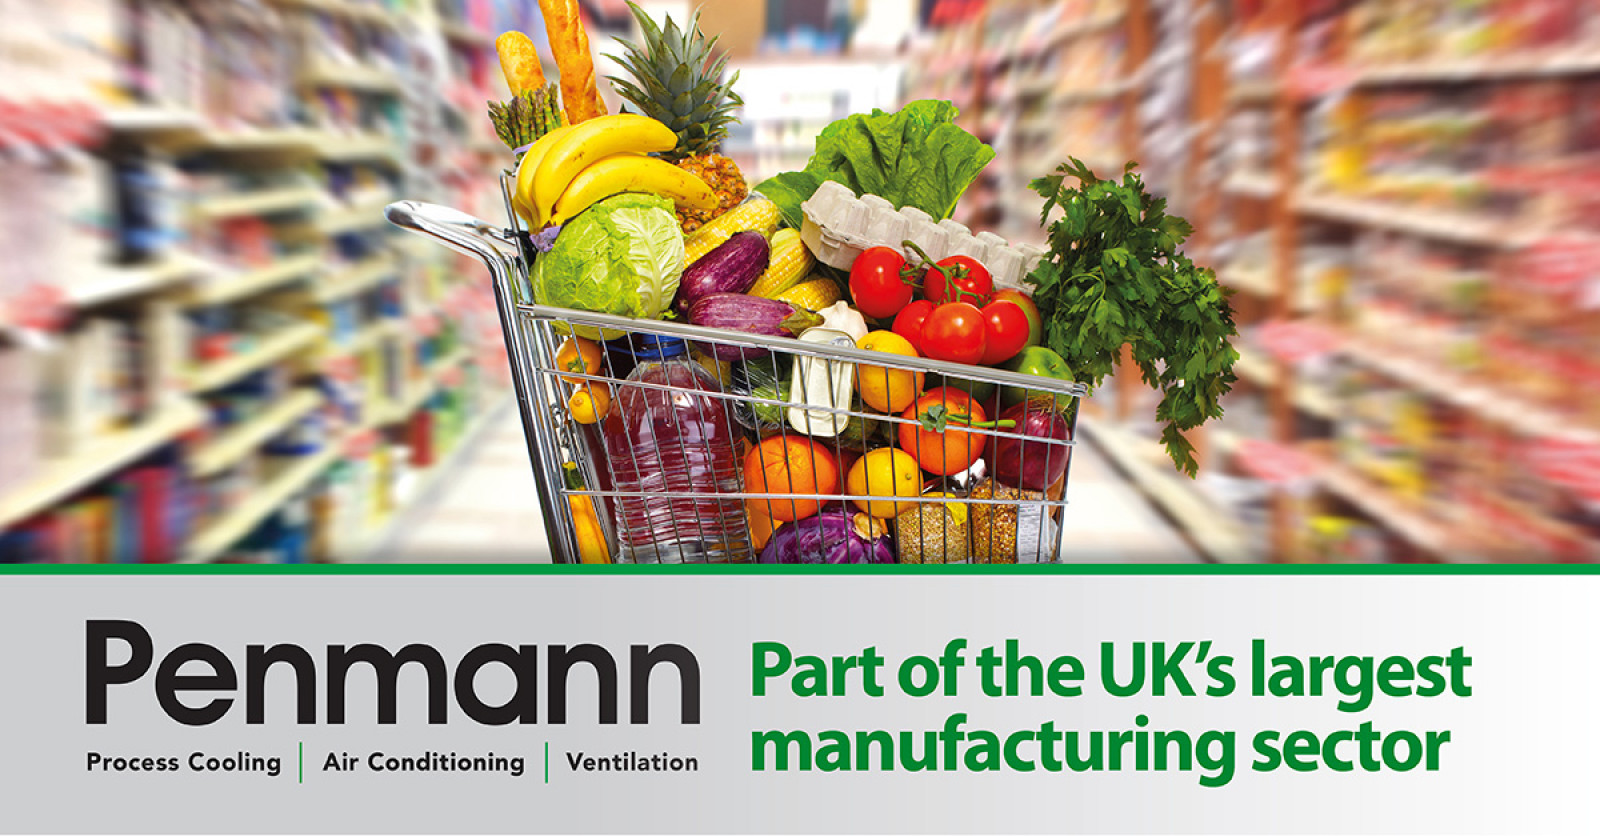 Penmann’s contribution to a £28.8bn industry